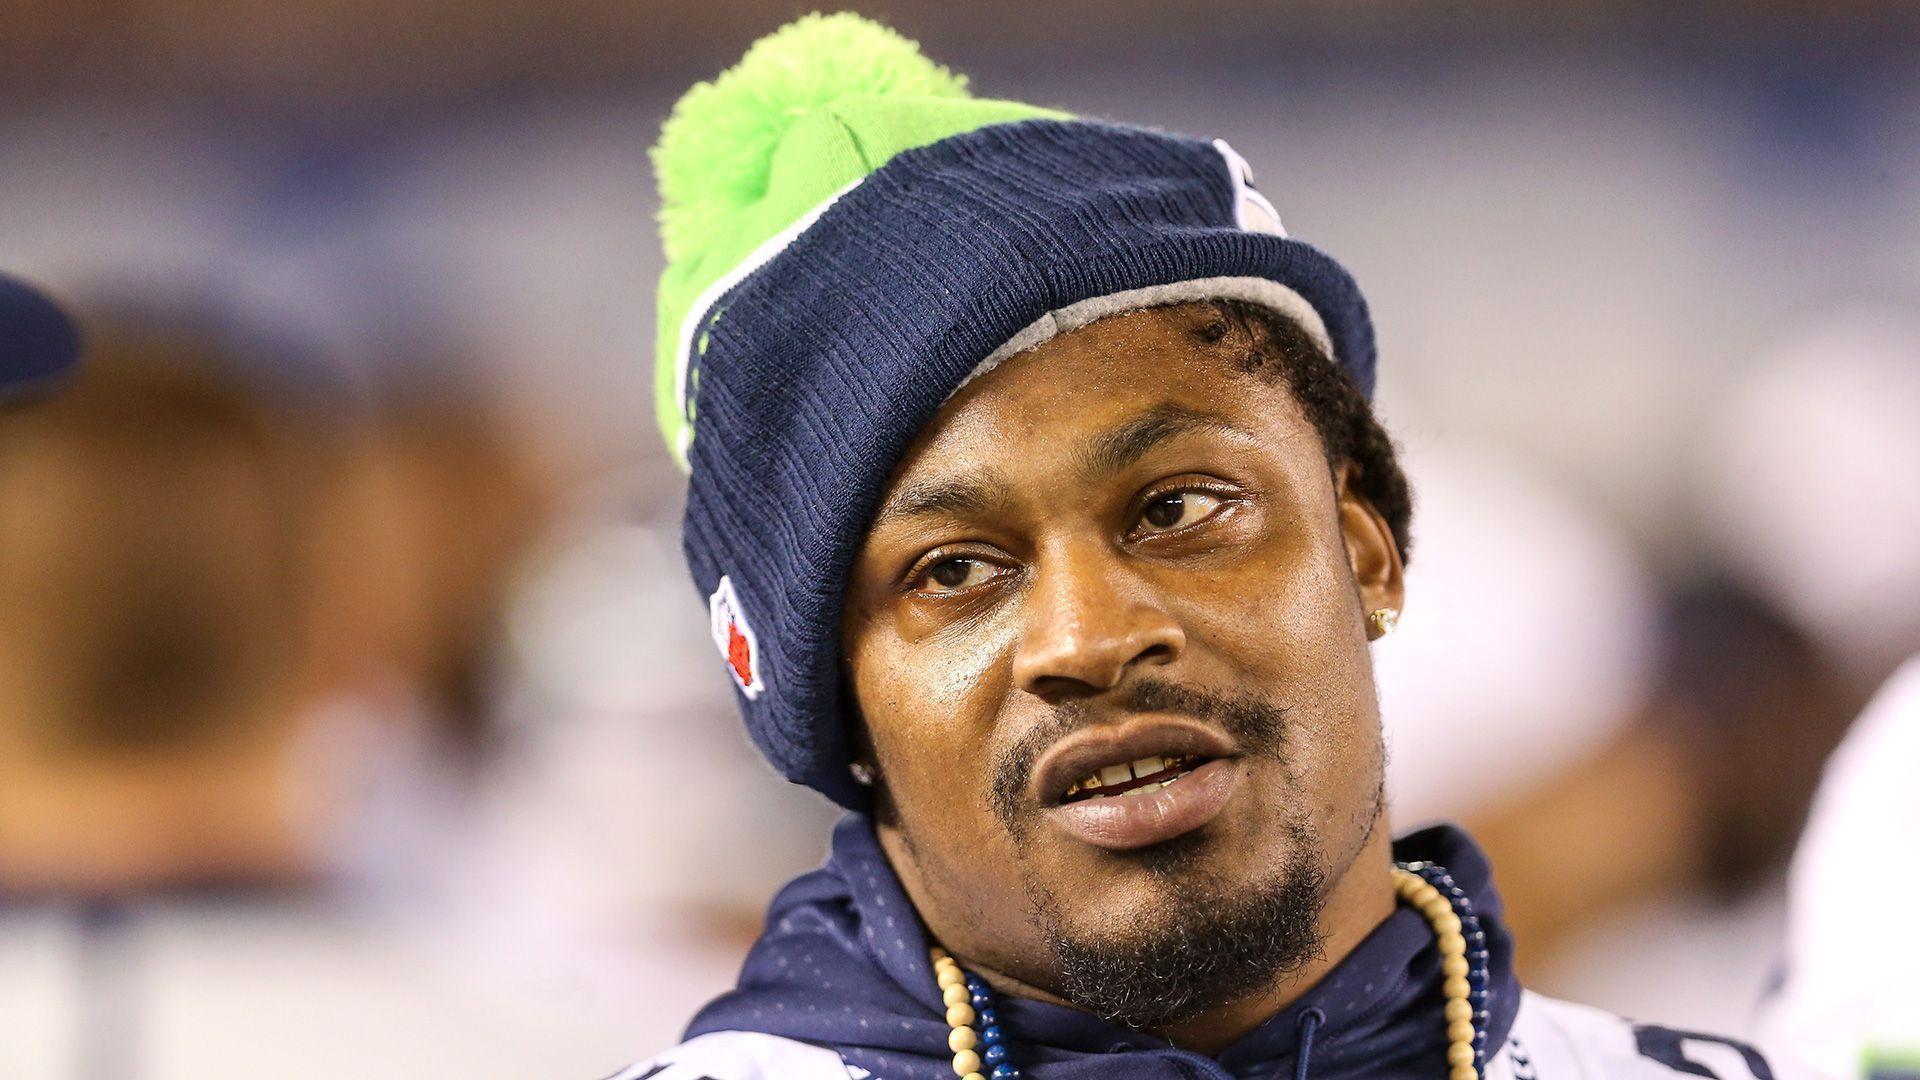 Marshawn lynch Wallpaper Image Photo Picture Background